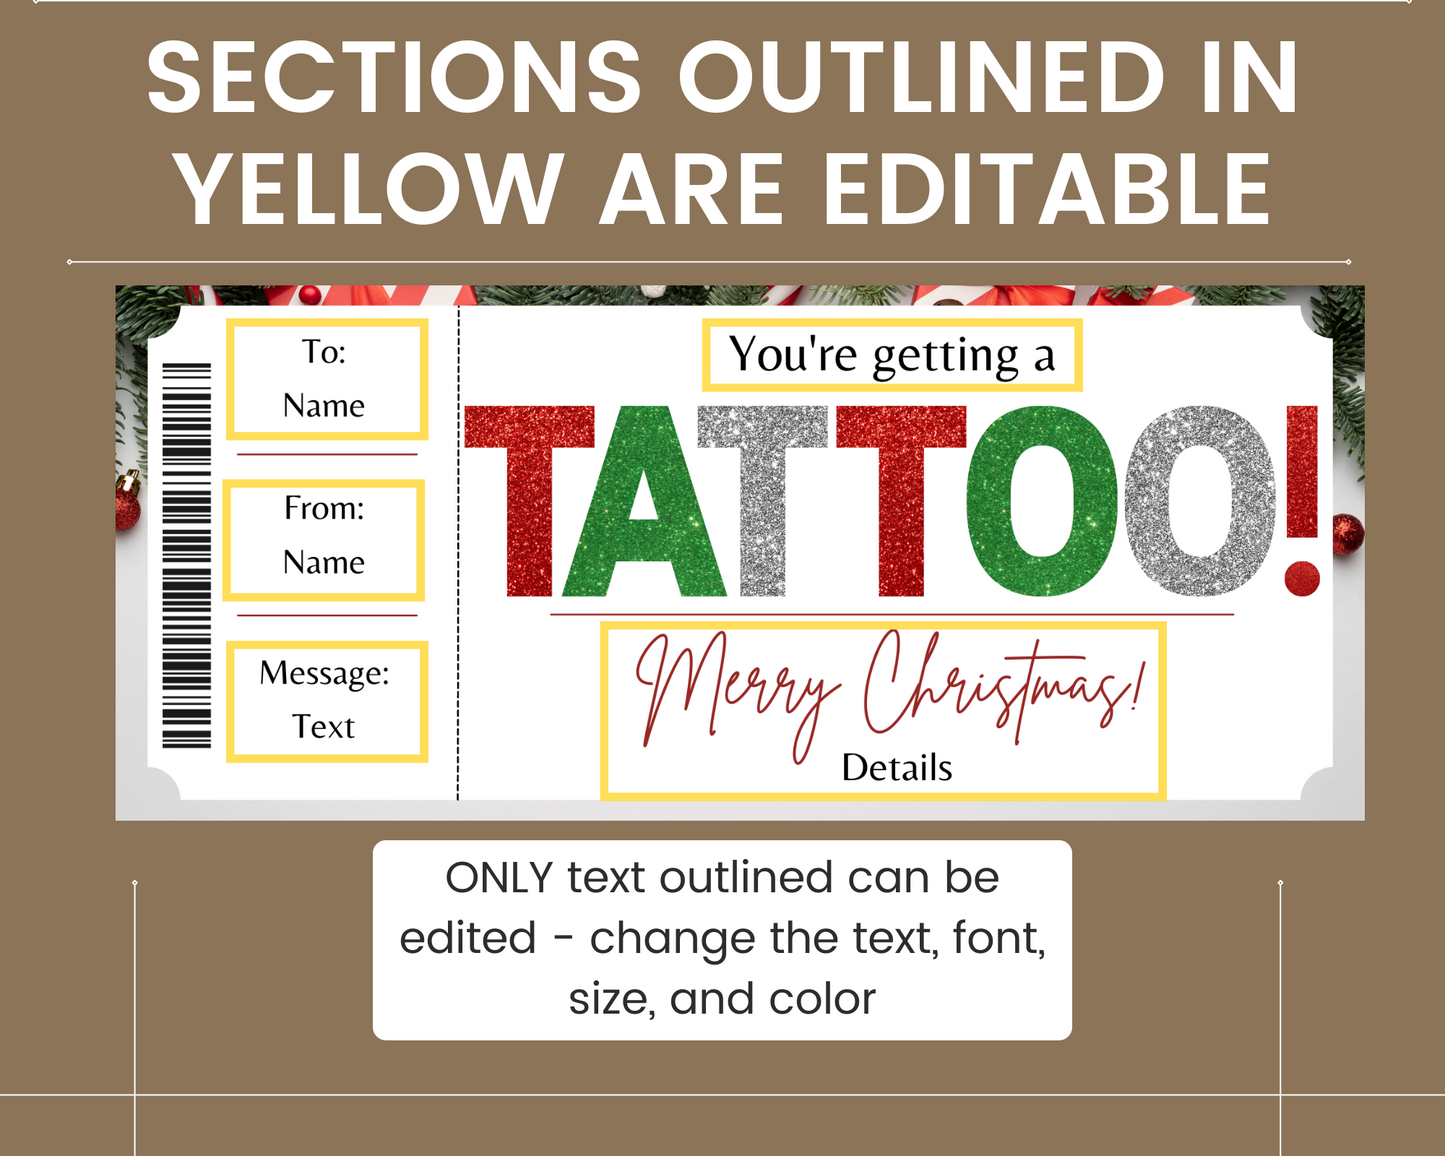 Christmas Tattoo Gift Certificate Template